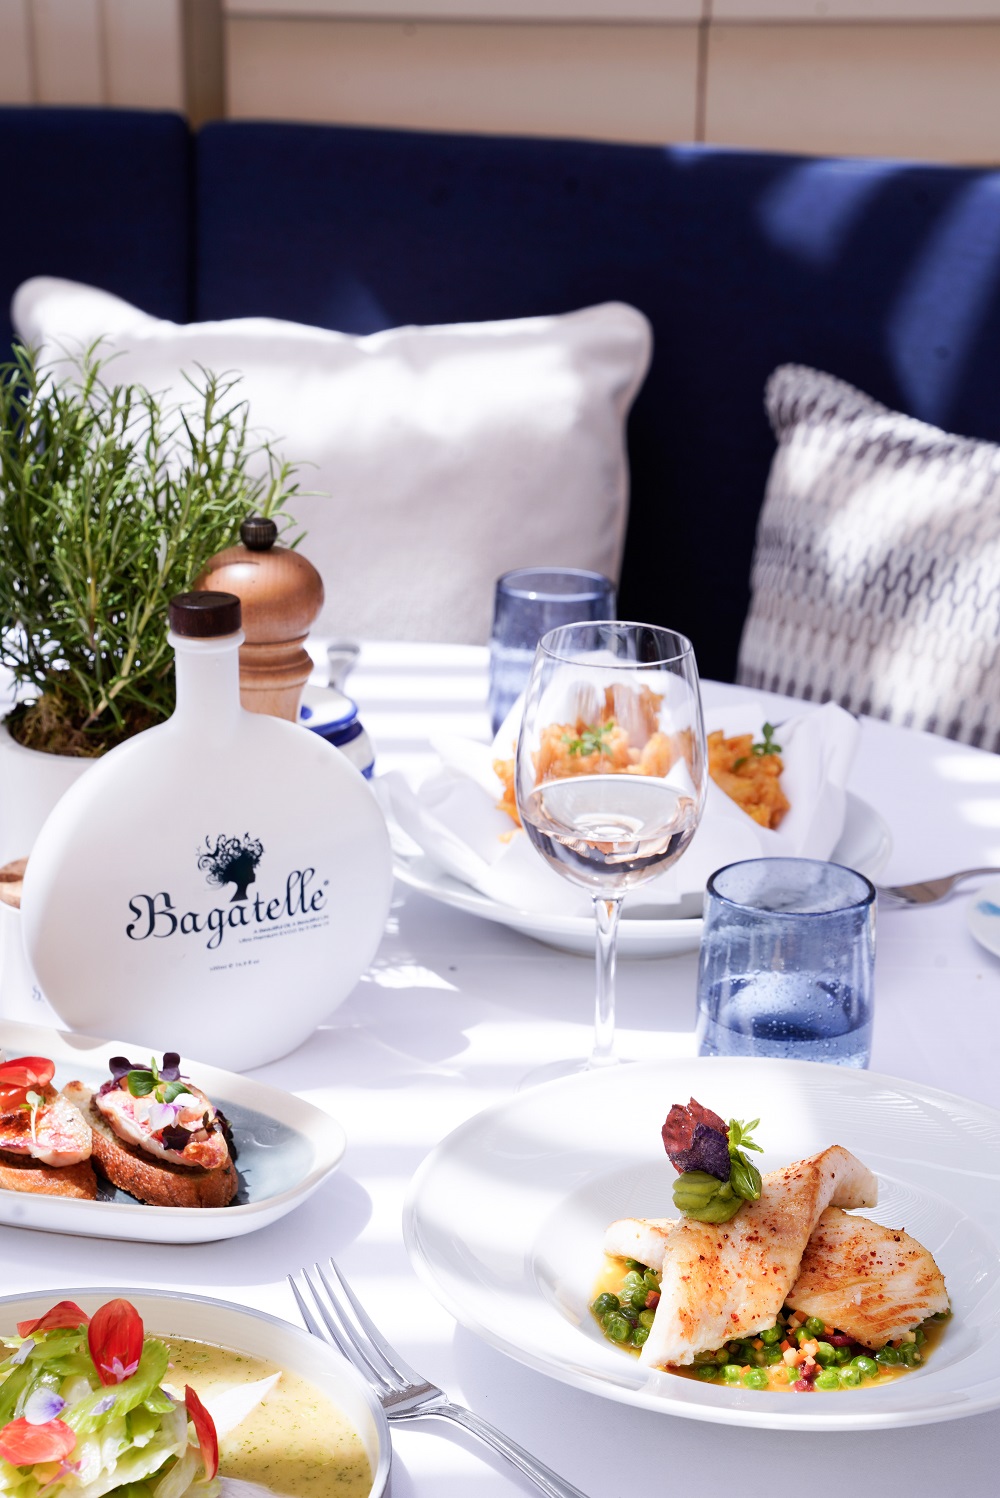 BAGATELLE IS LANDING IN TULUM AND UNVEILS A BOHEMIAN & LUXURIOUS ATMOSPHERE